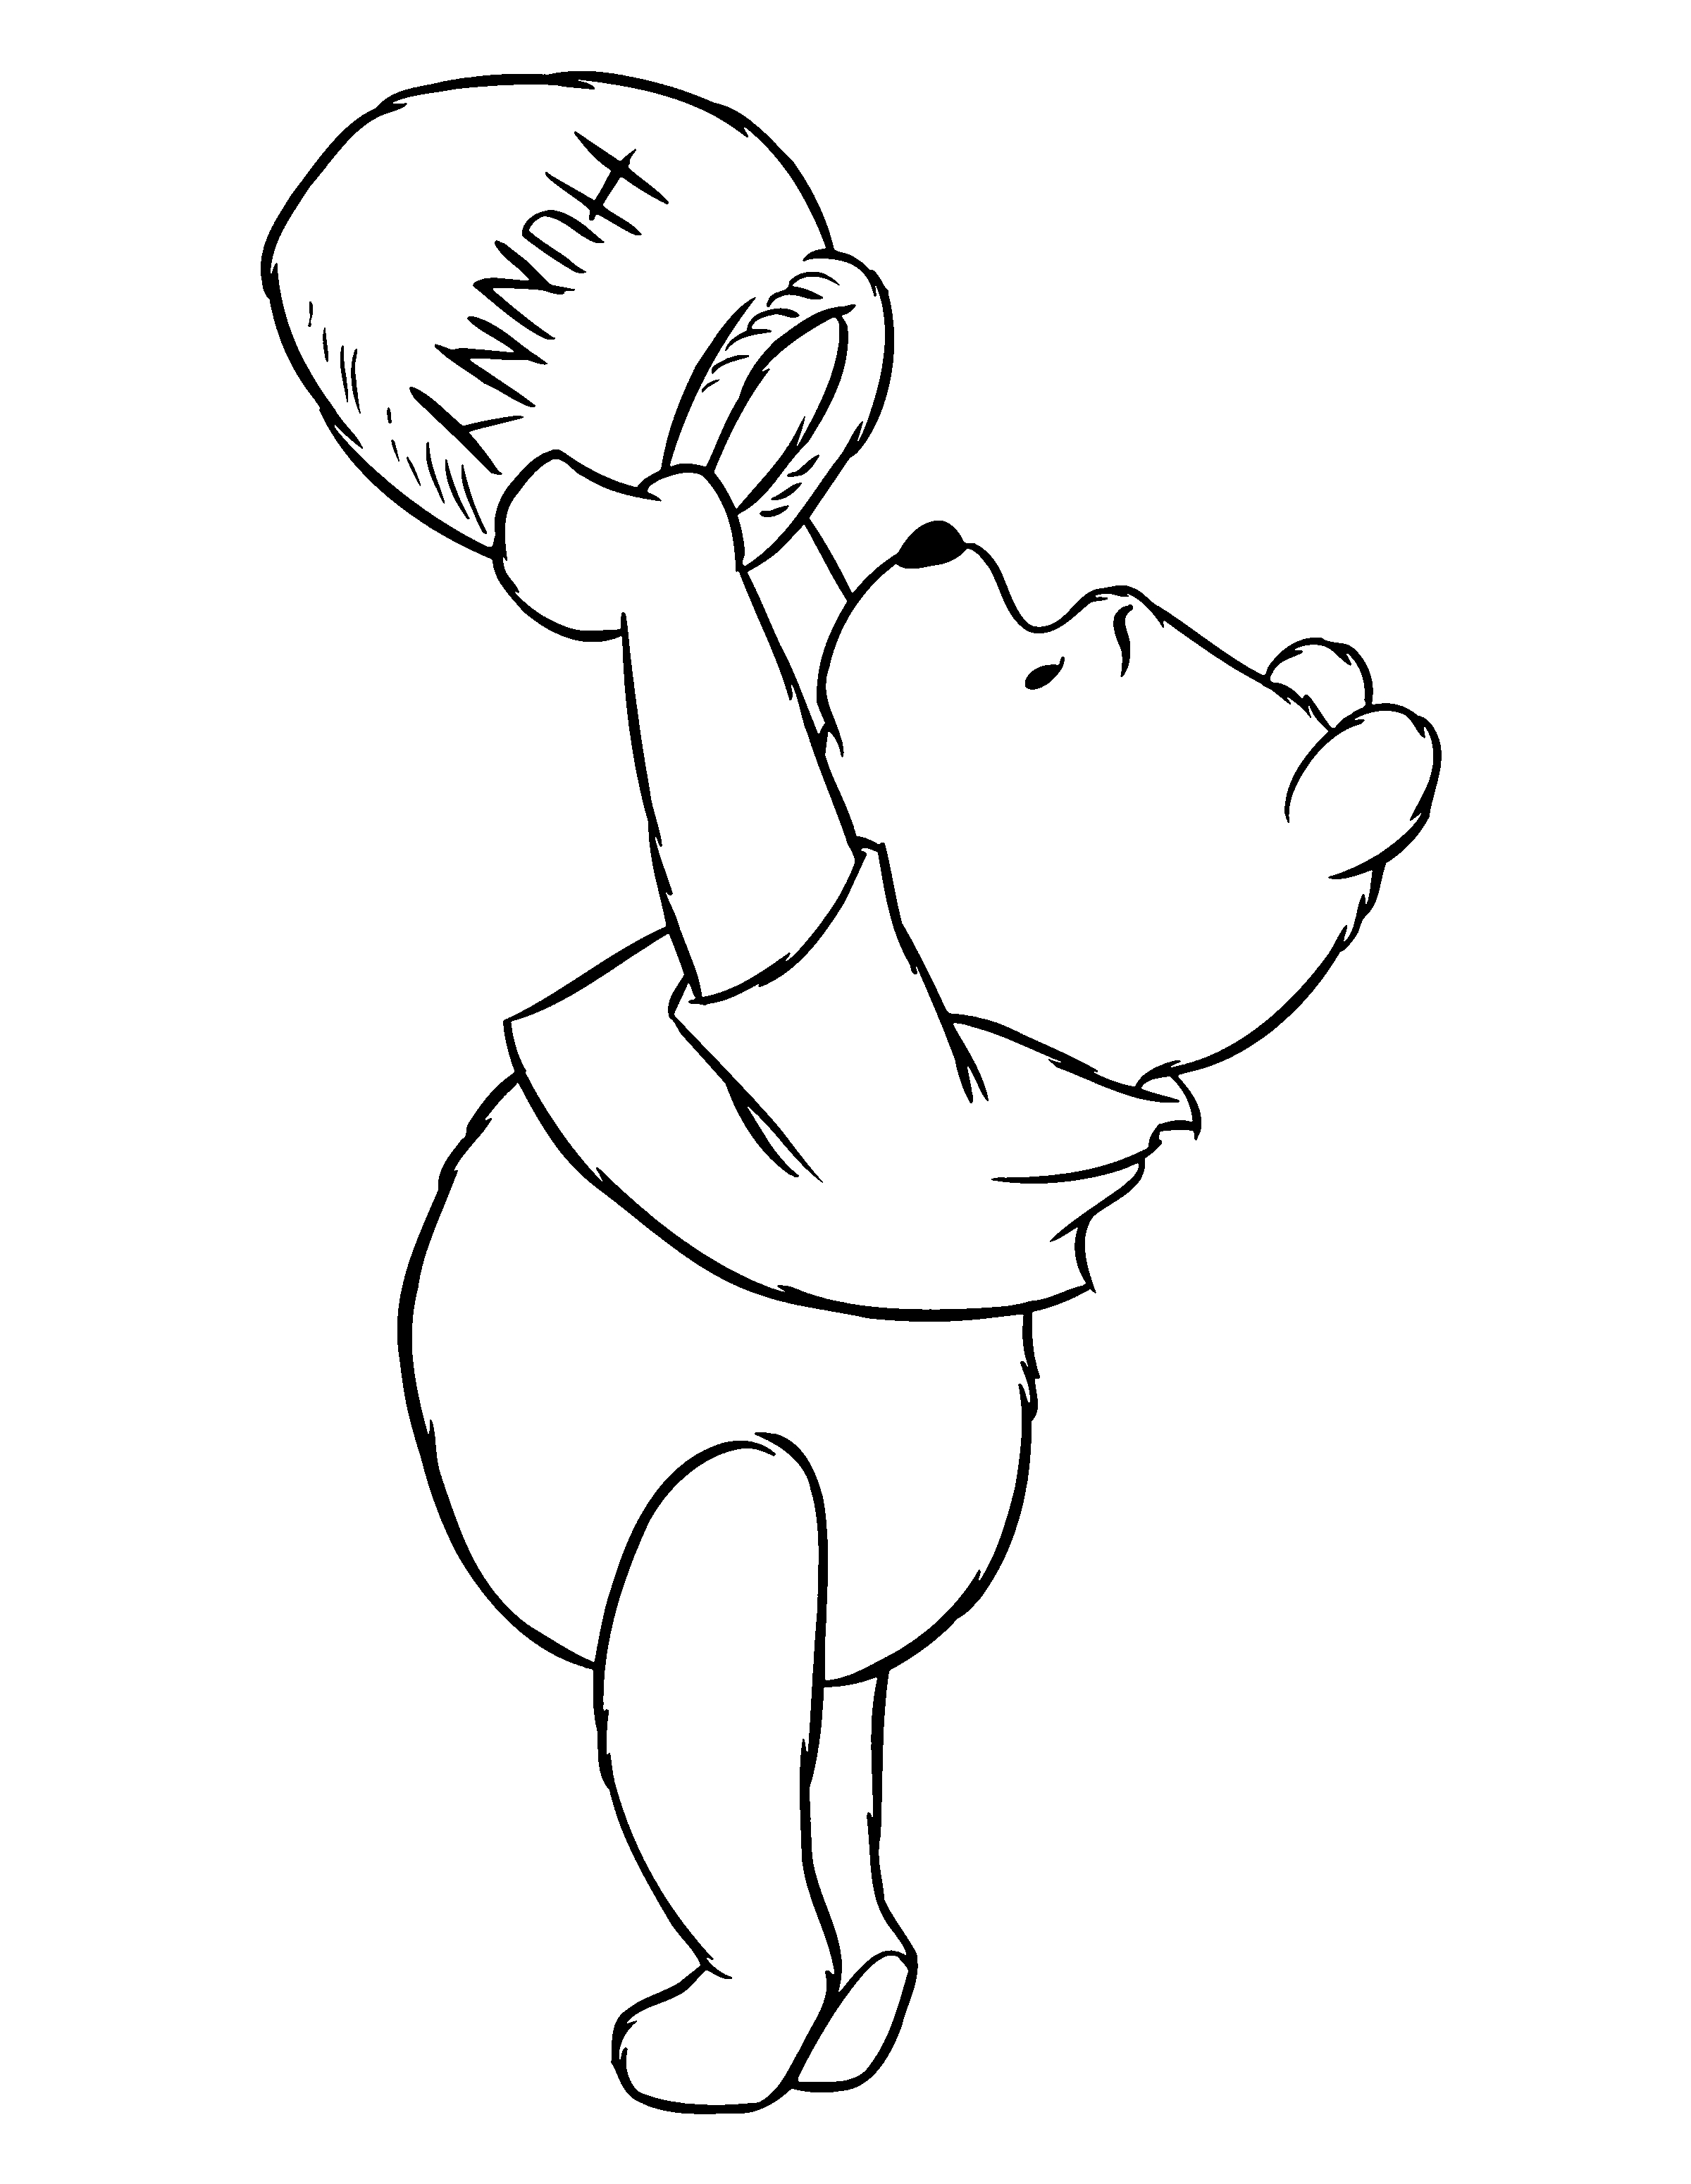 Winnie The Pooh Coloring Pages Online Coloring Ideas Winnie The Pooh For Coloring Pages To Print Free